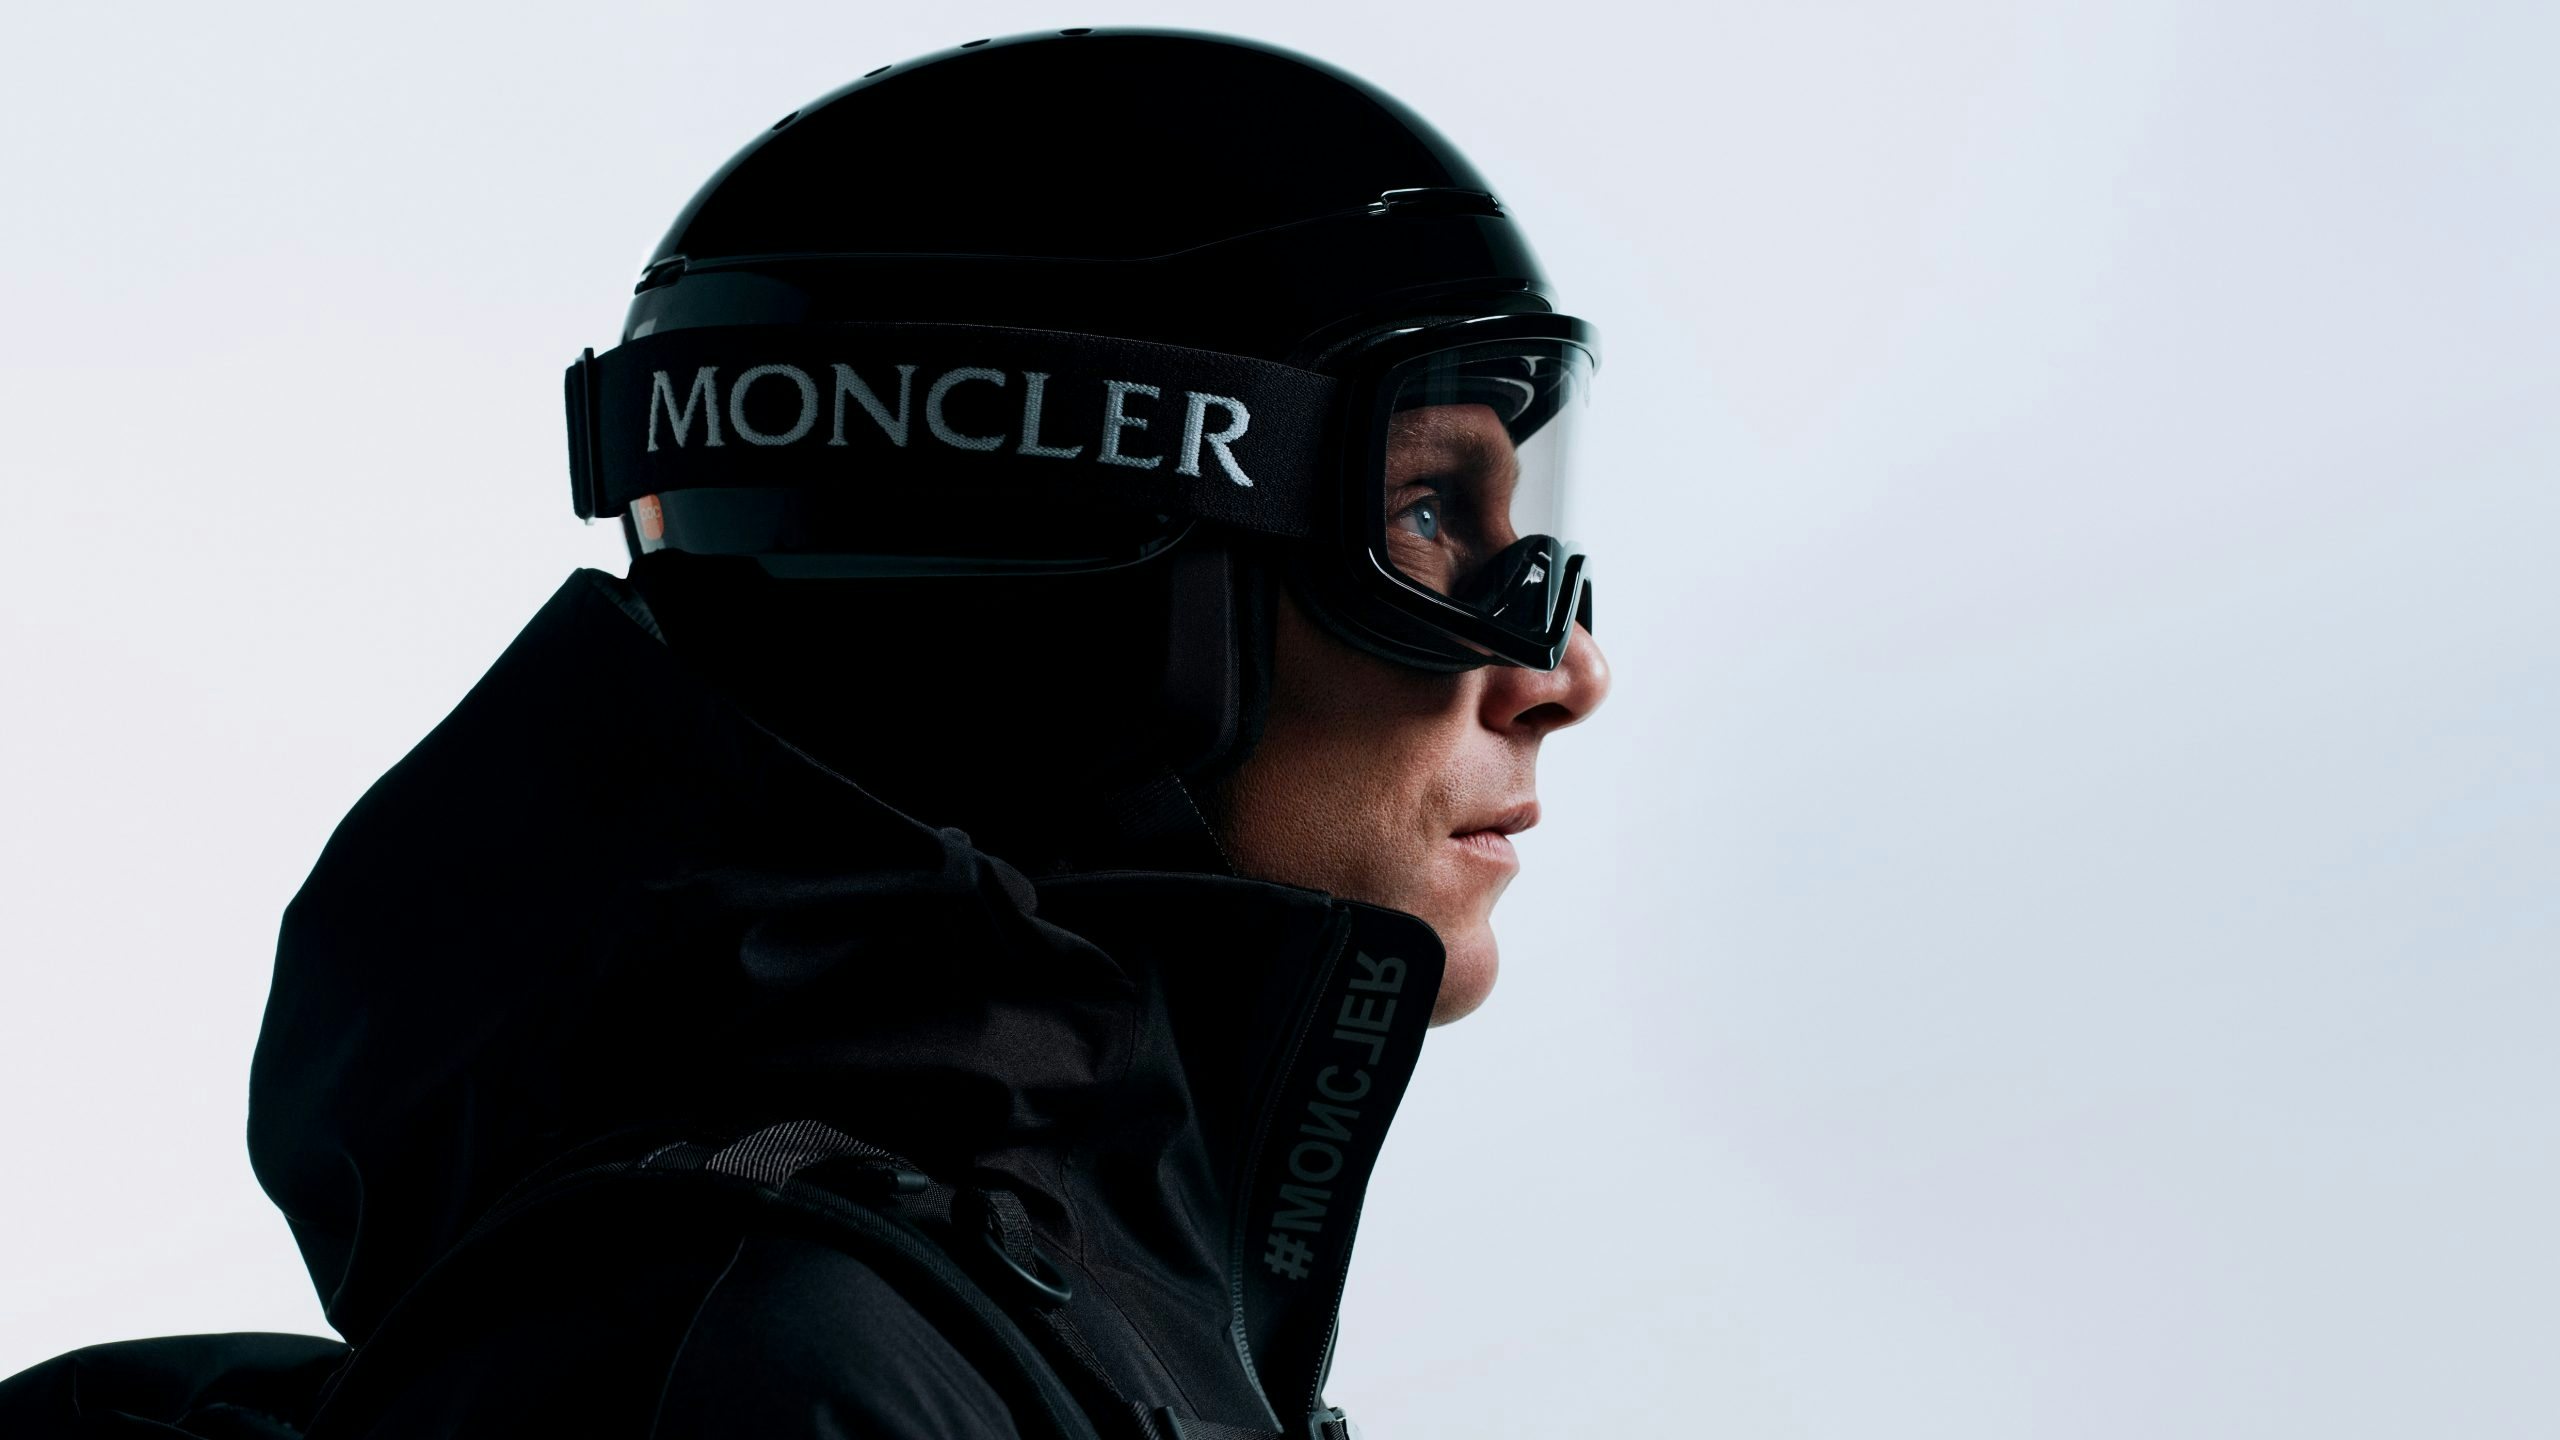 Regardless of the activity this winter, Chinese consumers want to look stylish. Here’s why the Grenoble Fall 22 collection makes Moncler the world’s leading name for luxury outerwear. Photo: Courtesy of Moncler